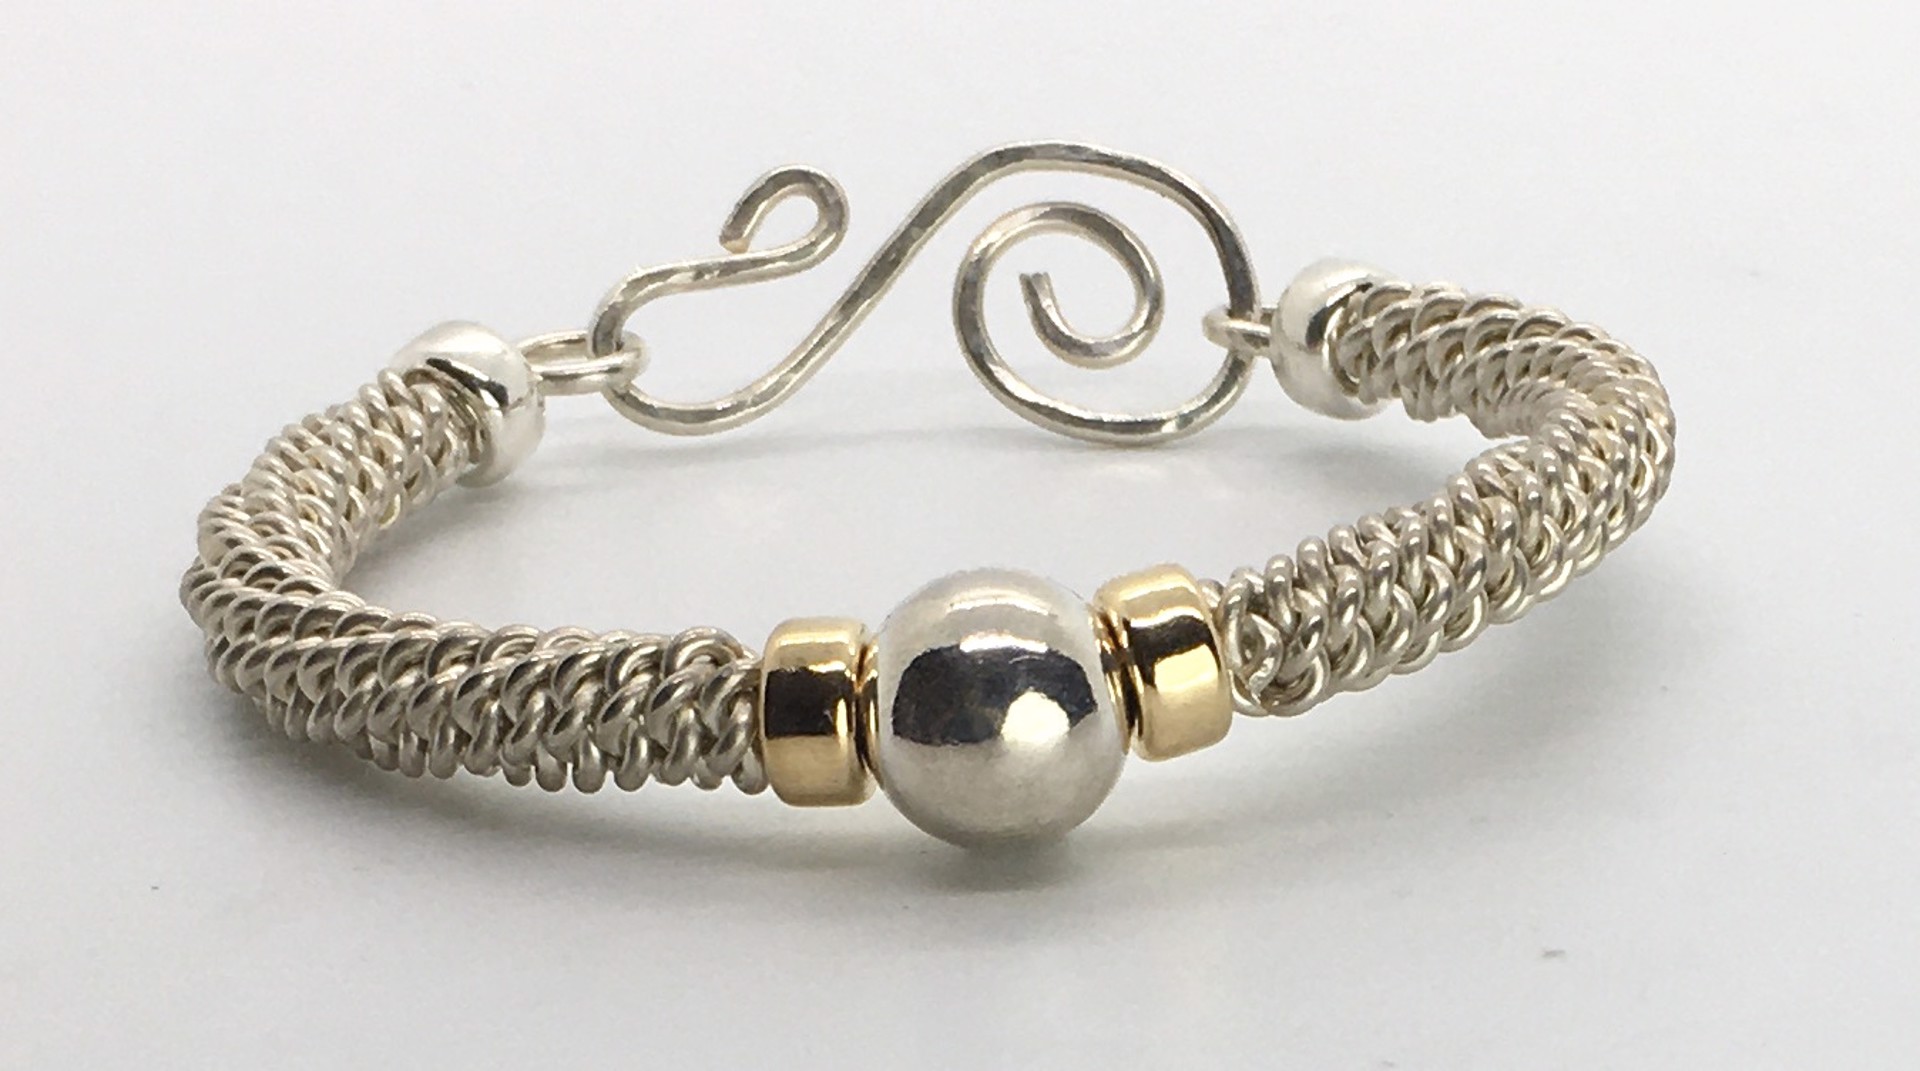 Woven Sterling Silver Bracelet with Gold Plated Rondelles  by Suzanne Woodworth